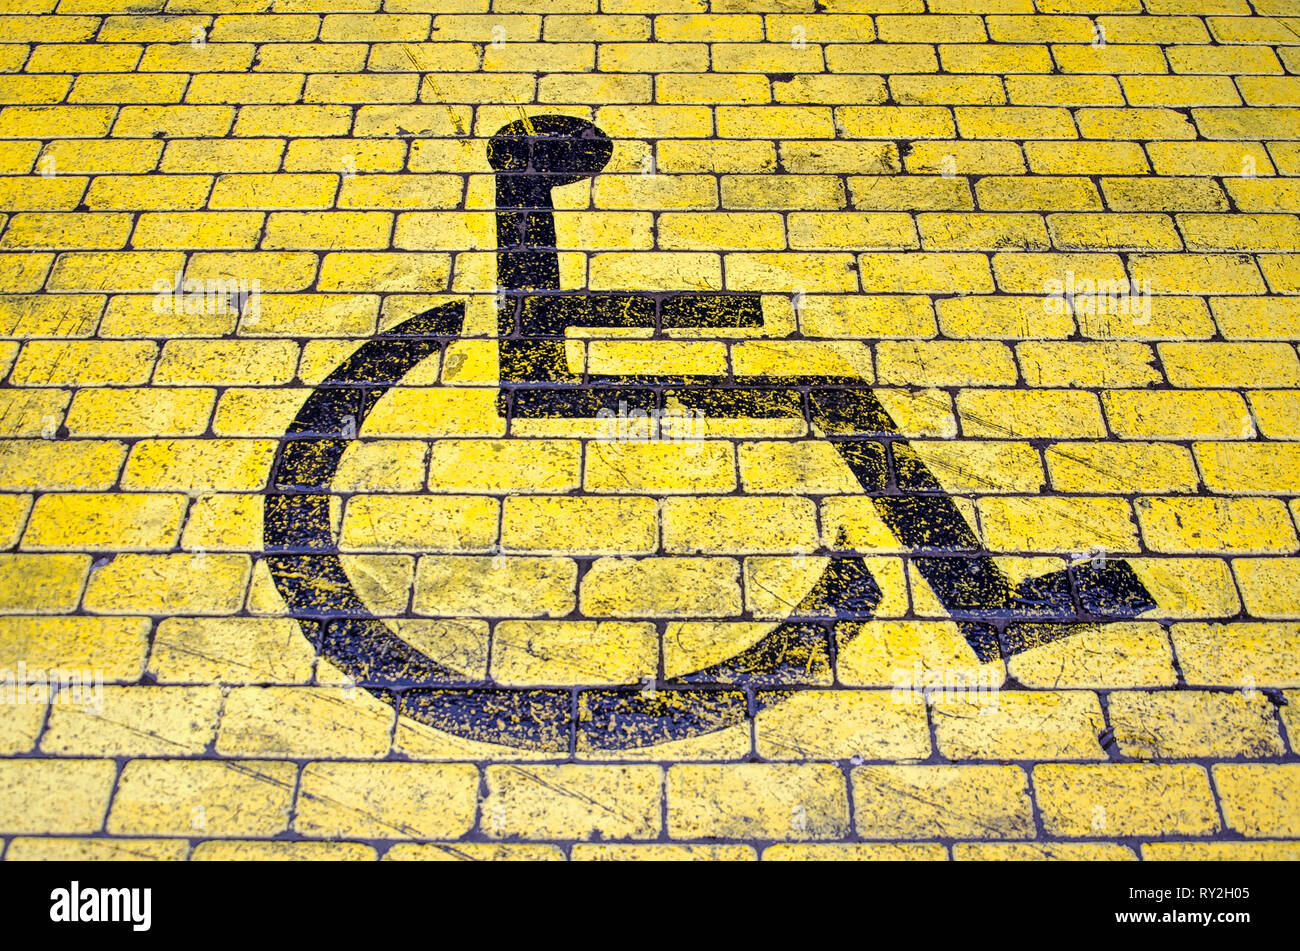 Wheelchair icon in black on yellow pavement indicating a parking place for disabled visitors Stock Photo